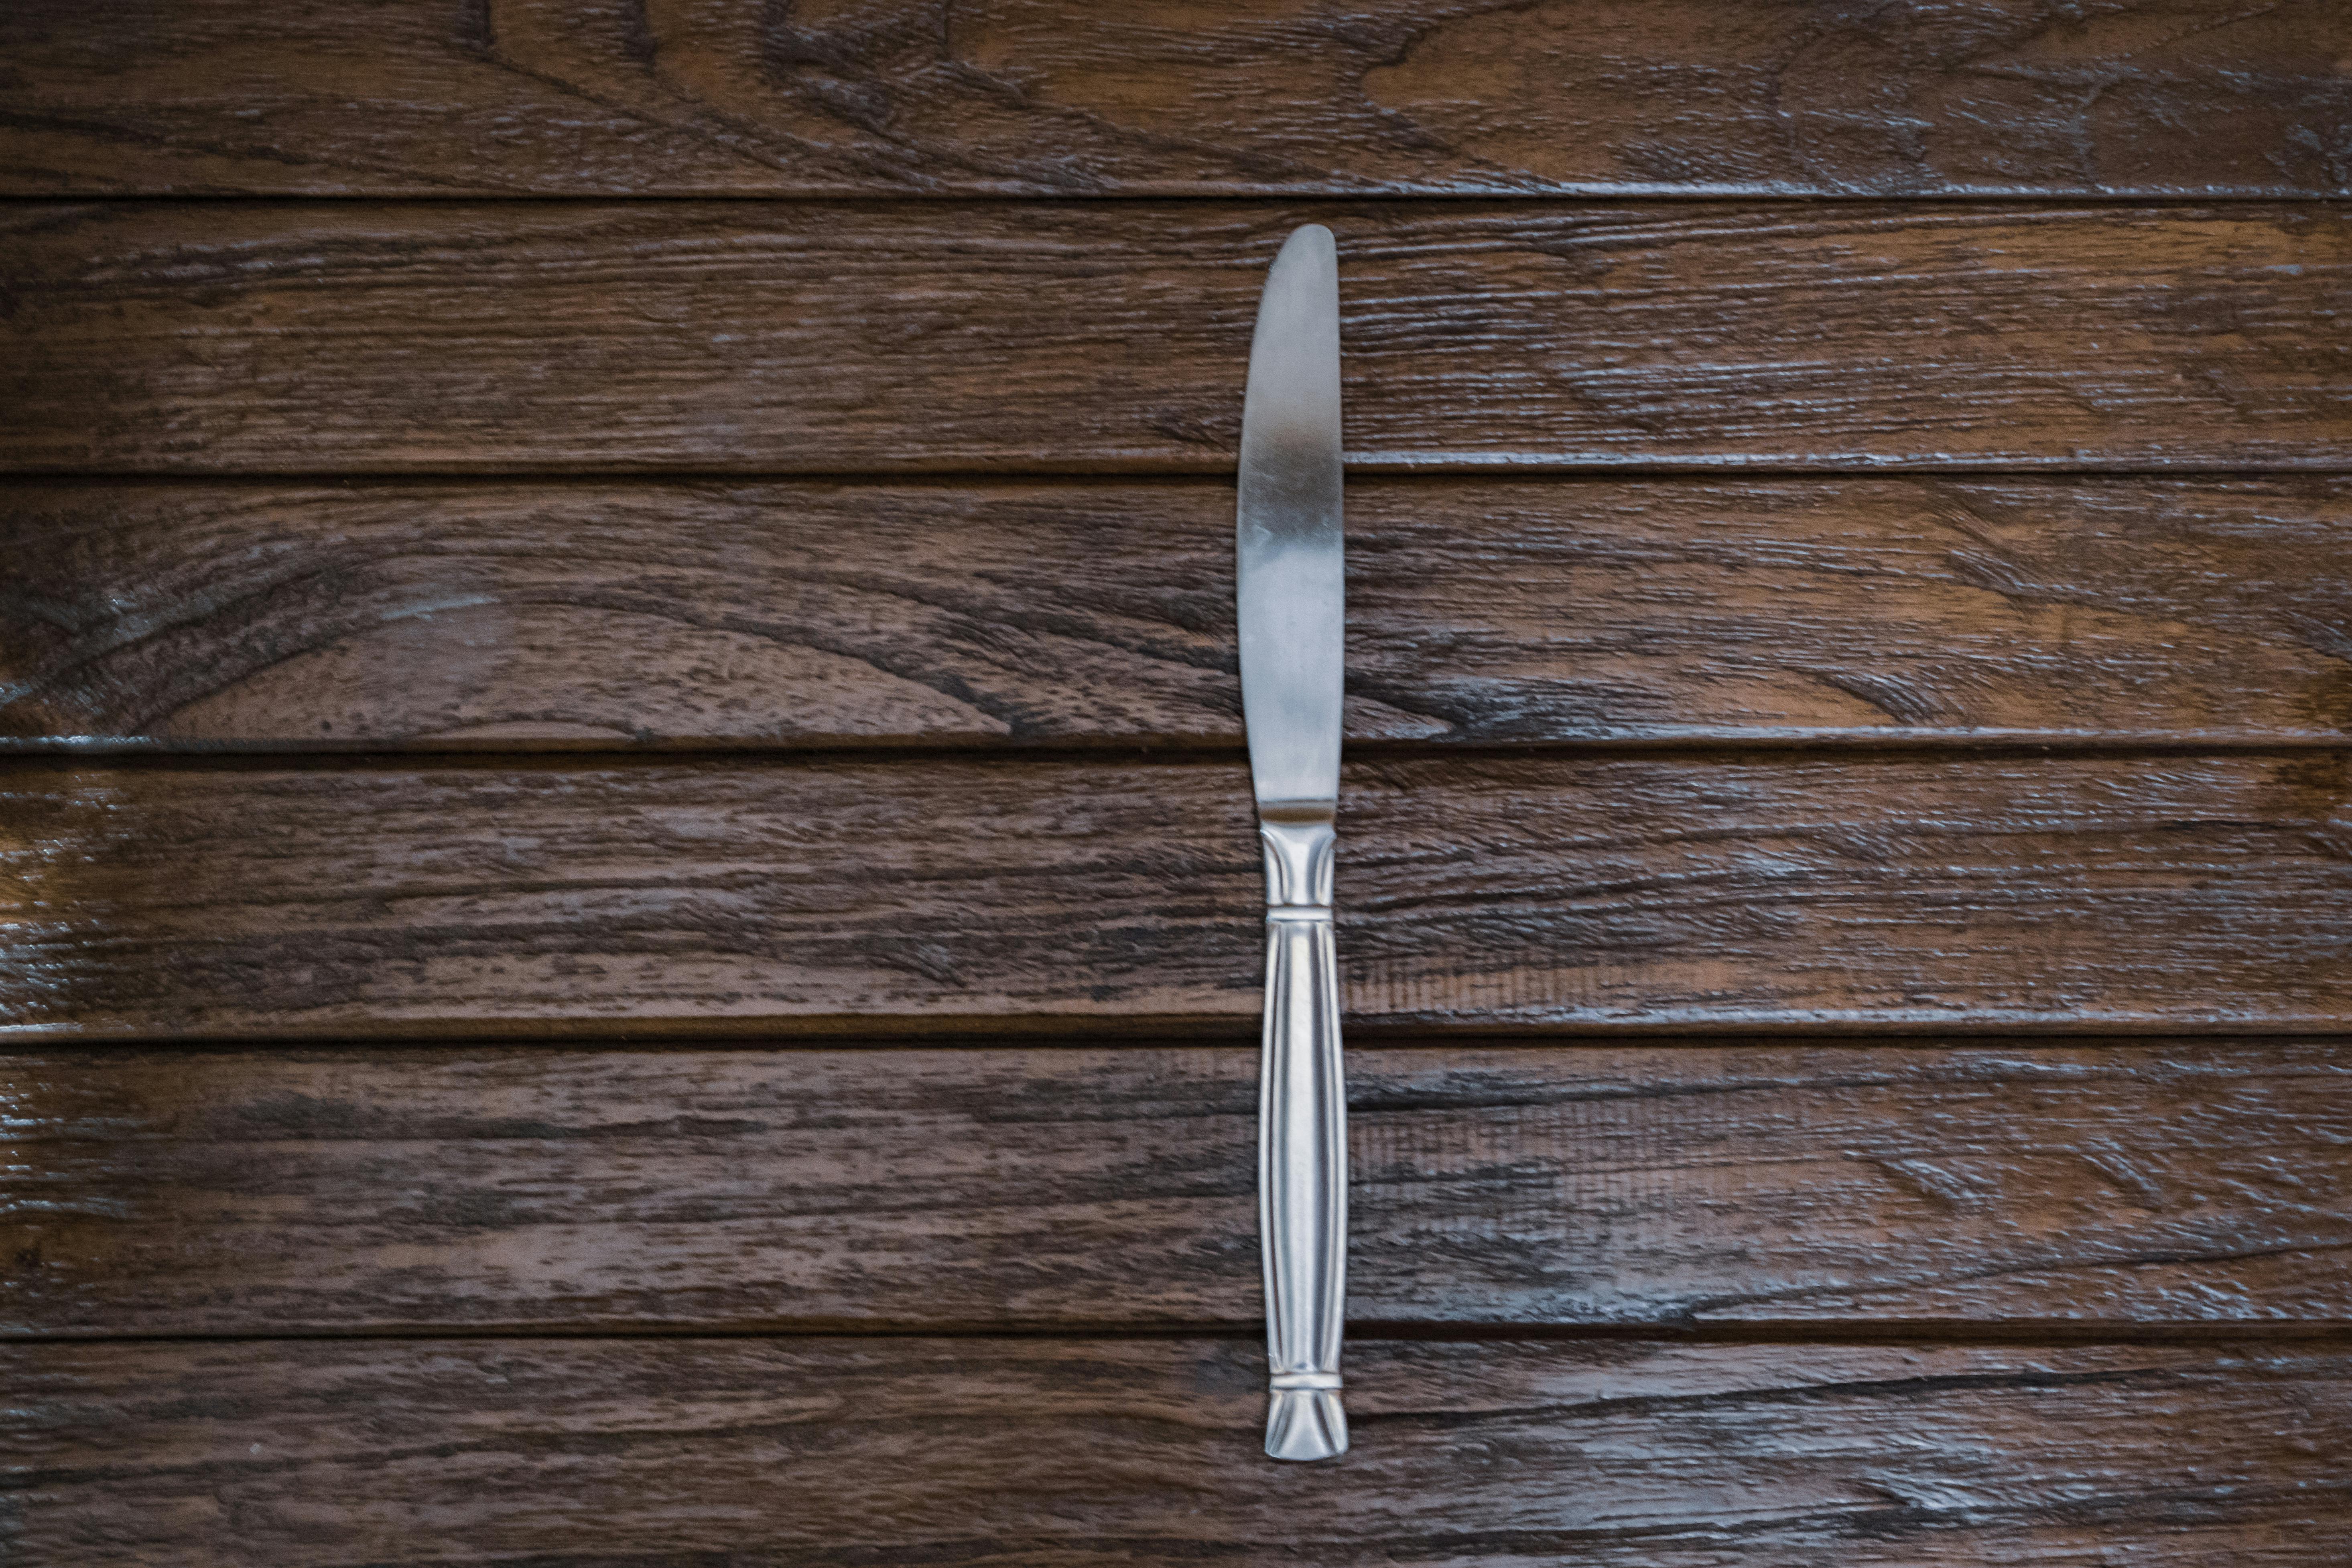 Free stock photo of bread knife, table knife